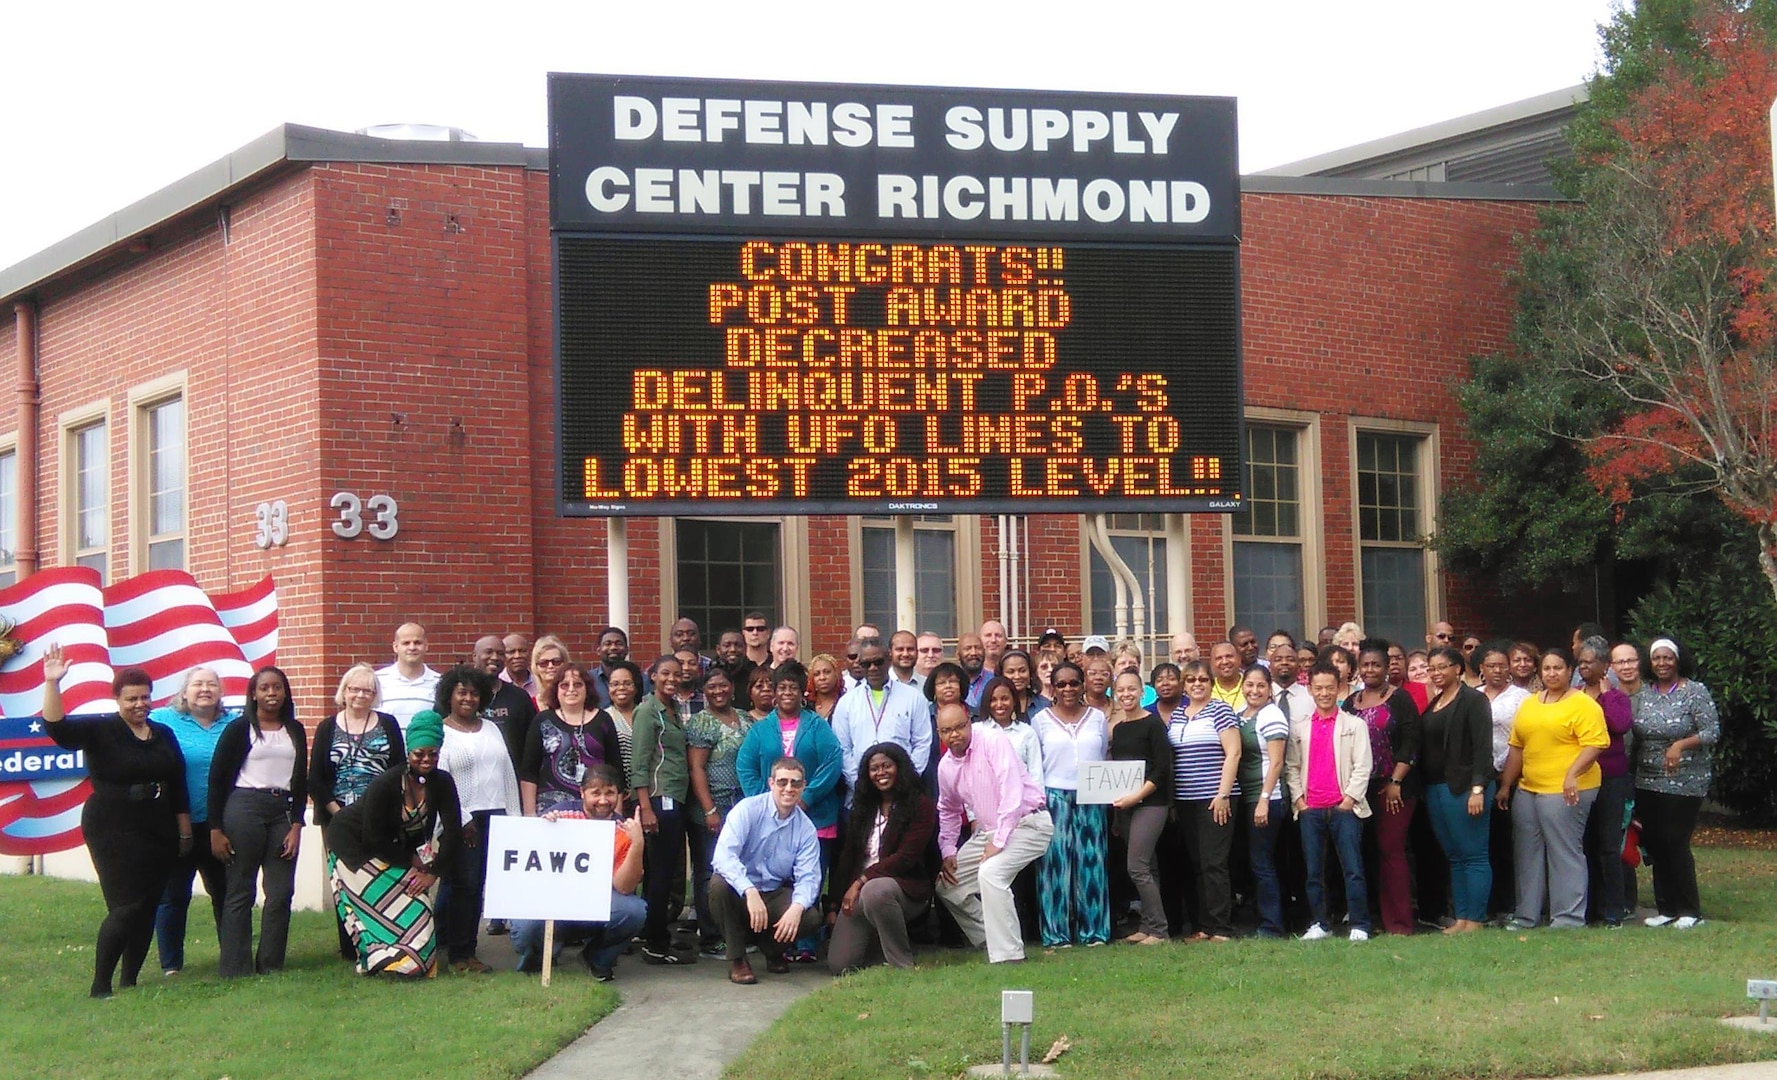 Defense Logistics Agency Aviation Supplier Operations Directorates’ Contract Administration team members proudly pose under the flashing marquee at Defense Supply Center Richmond, Virginia. Nov. 11, 2015.